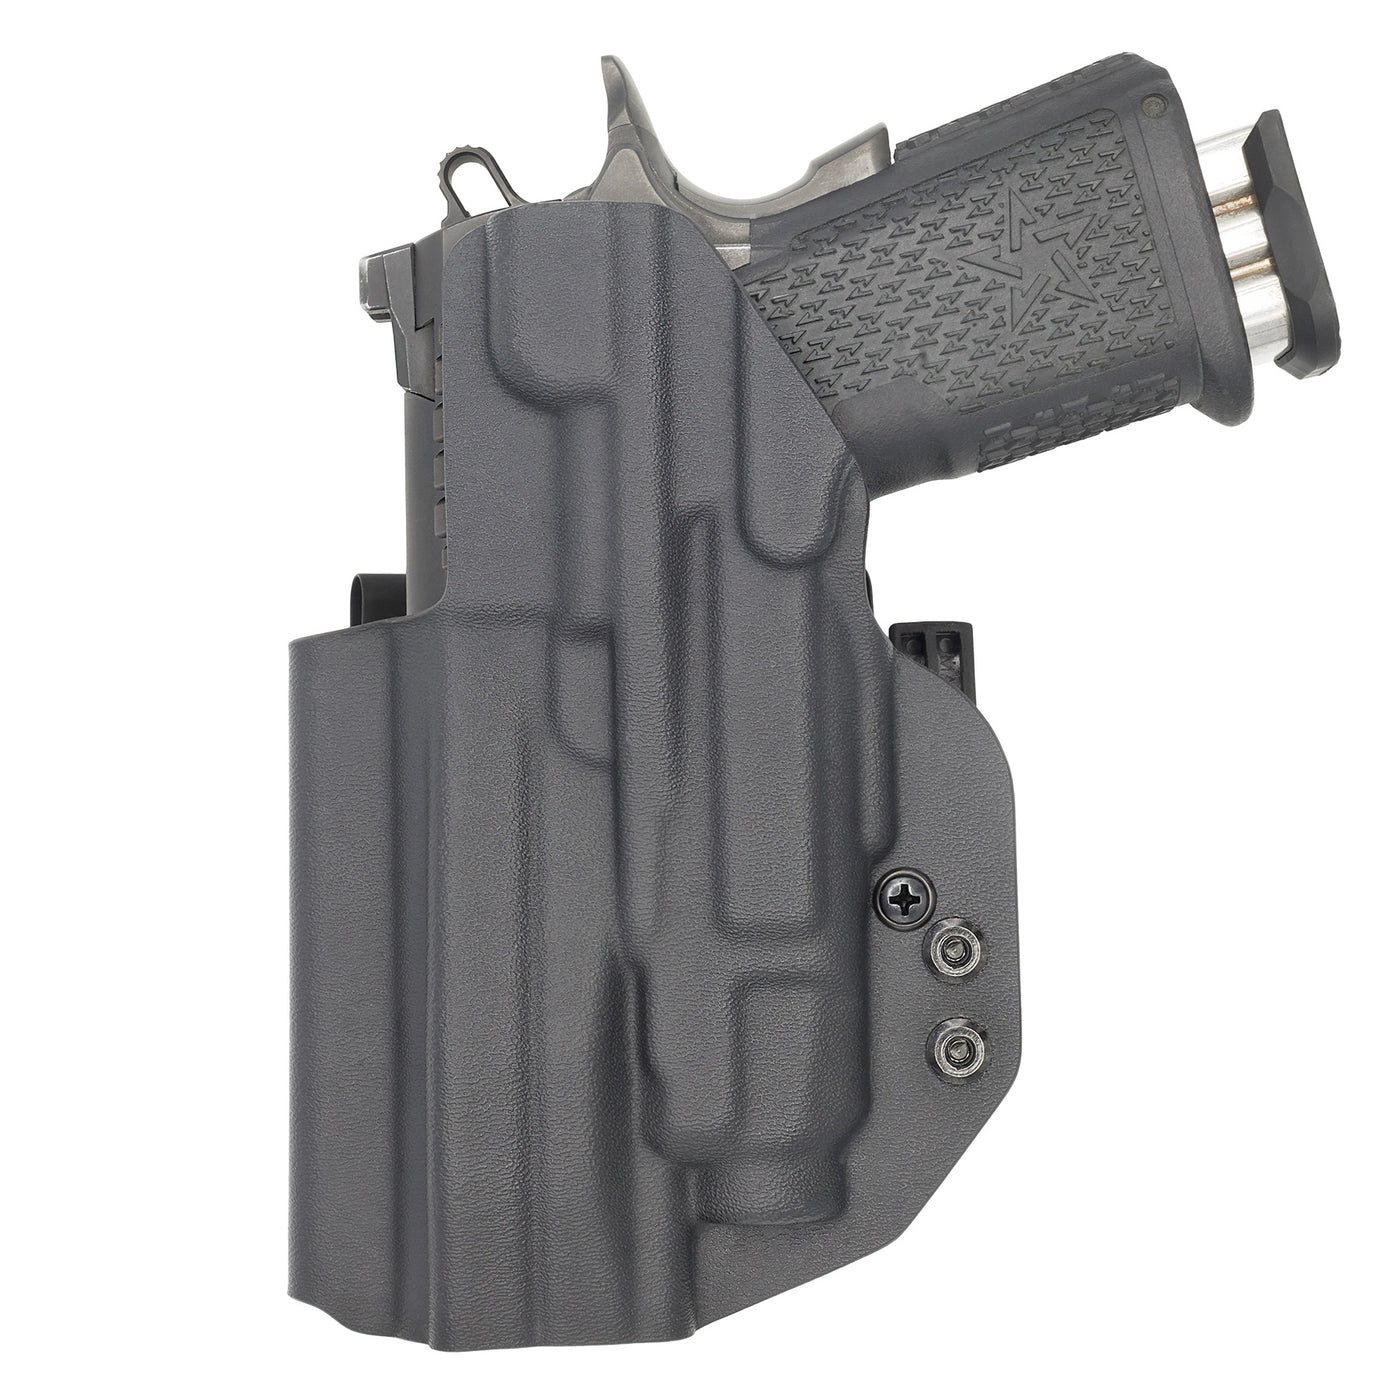 C&G Holsters custom IWB ALPHA UPGRADE Tactical 2011 Streamlight TLR7/a in holstered position back view